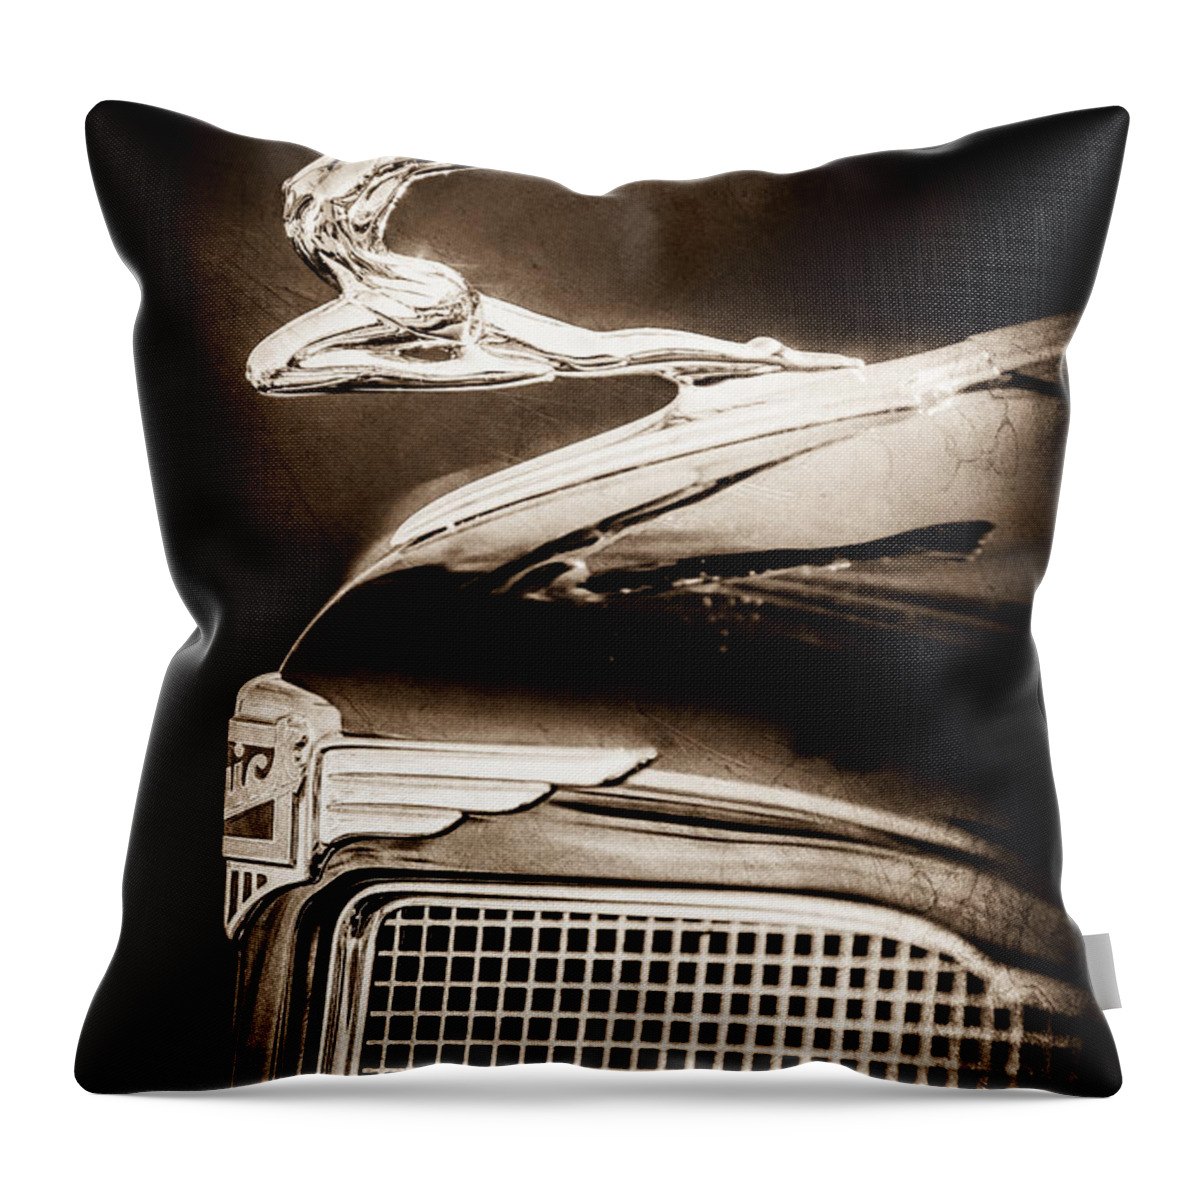 1934 Buick Series 96-c Convertible Coupe Hood Ornament Throw Pillow featuring the photograph 1934 Buick Series 96-C Convertible Coupe Hood Ornament - Emblem -0527s by Jill Reger